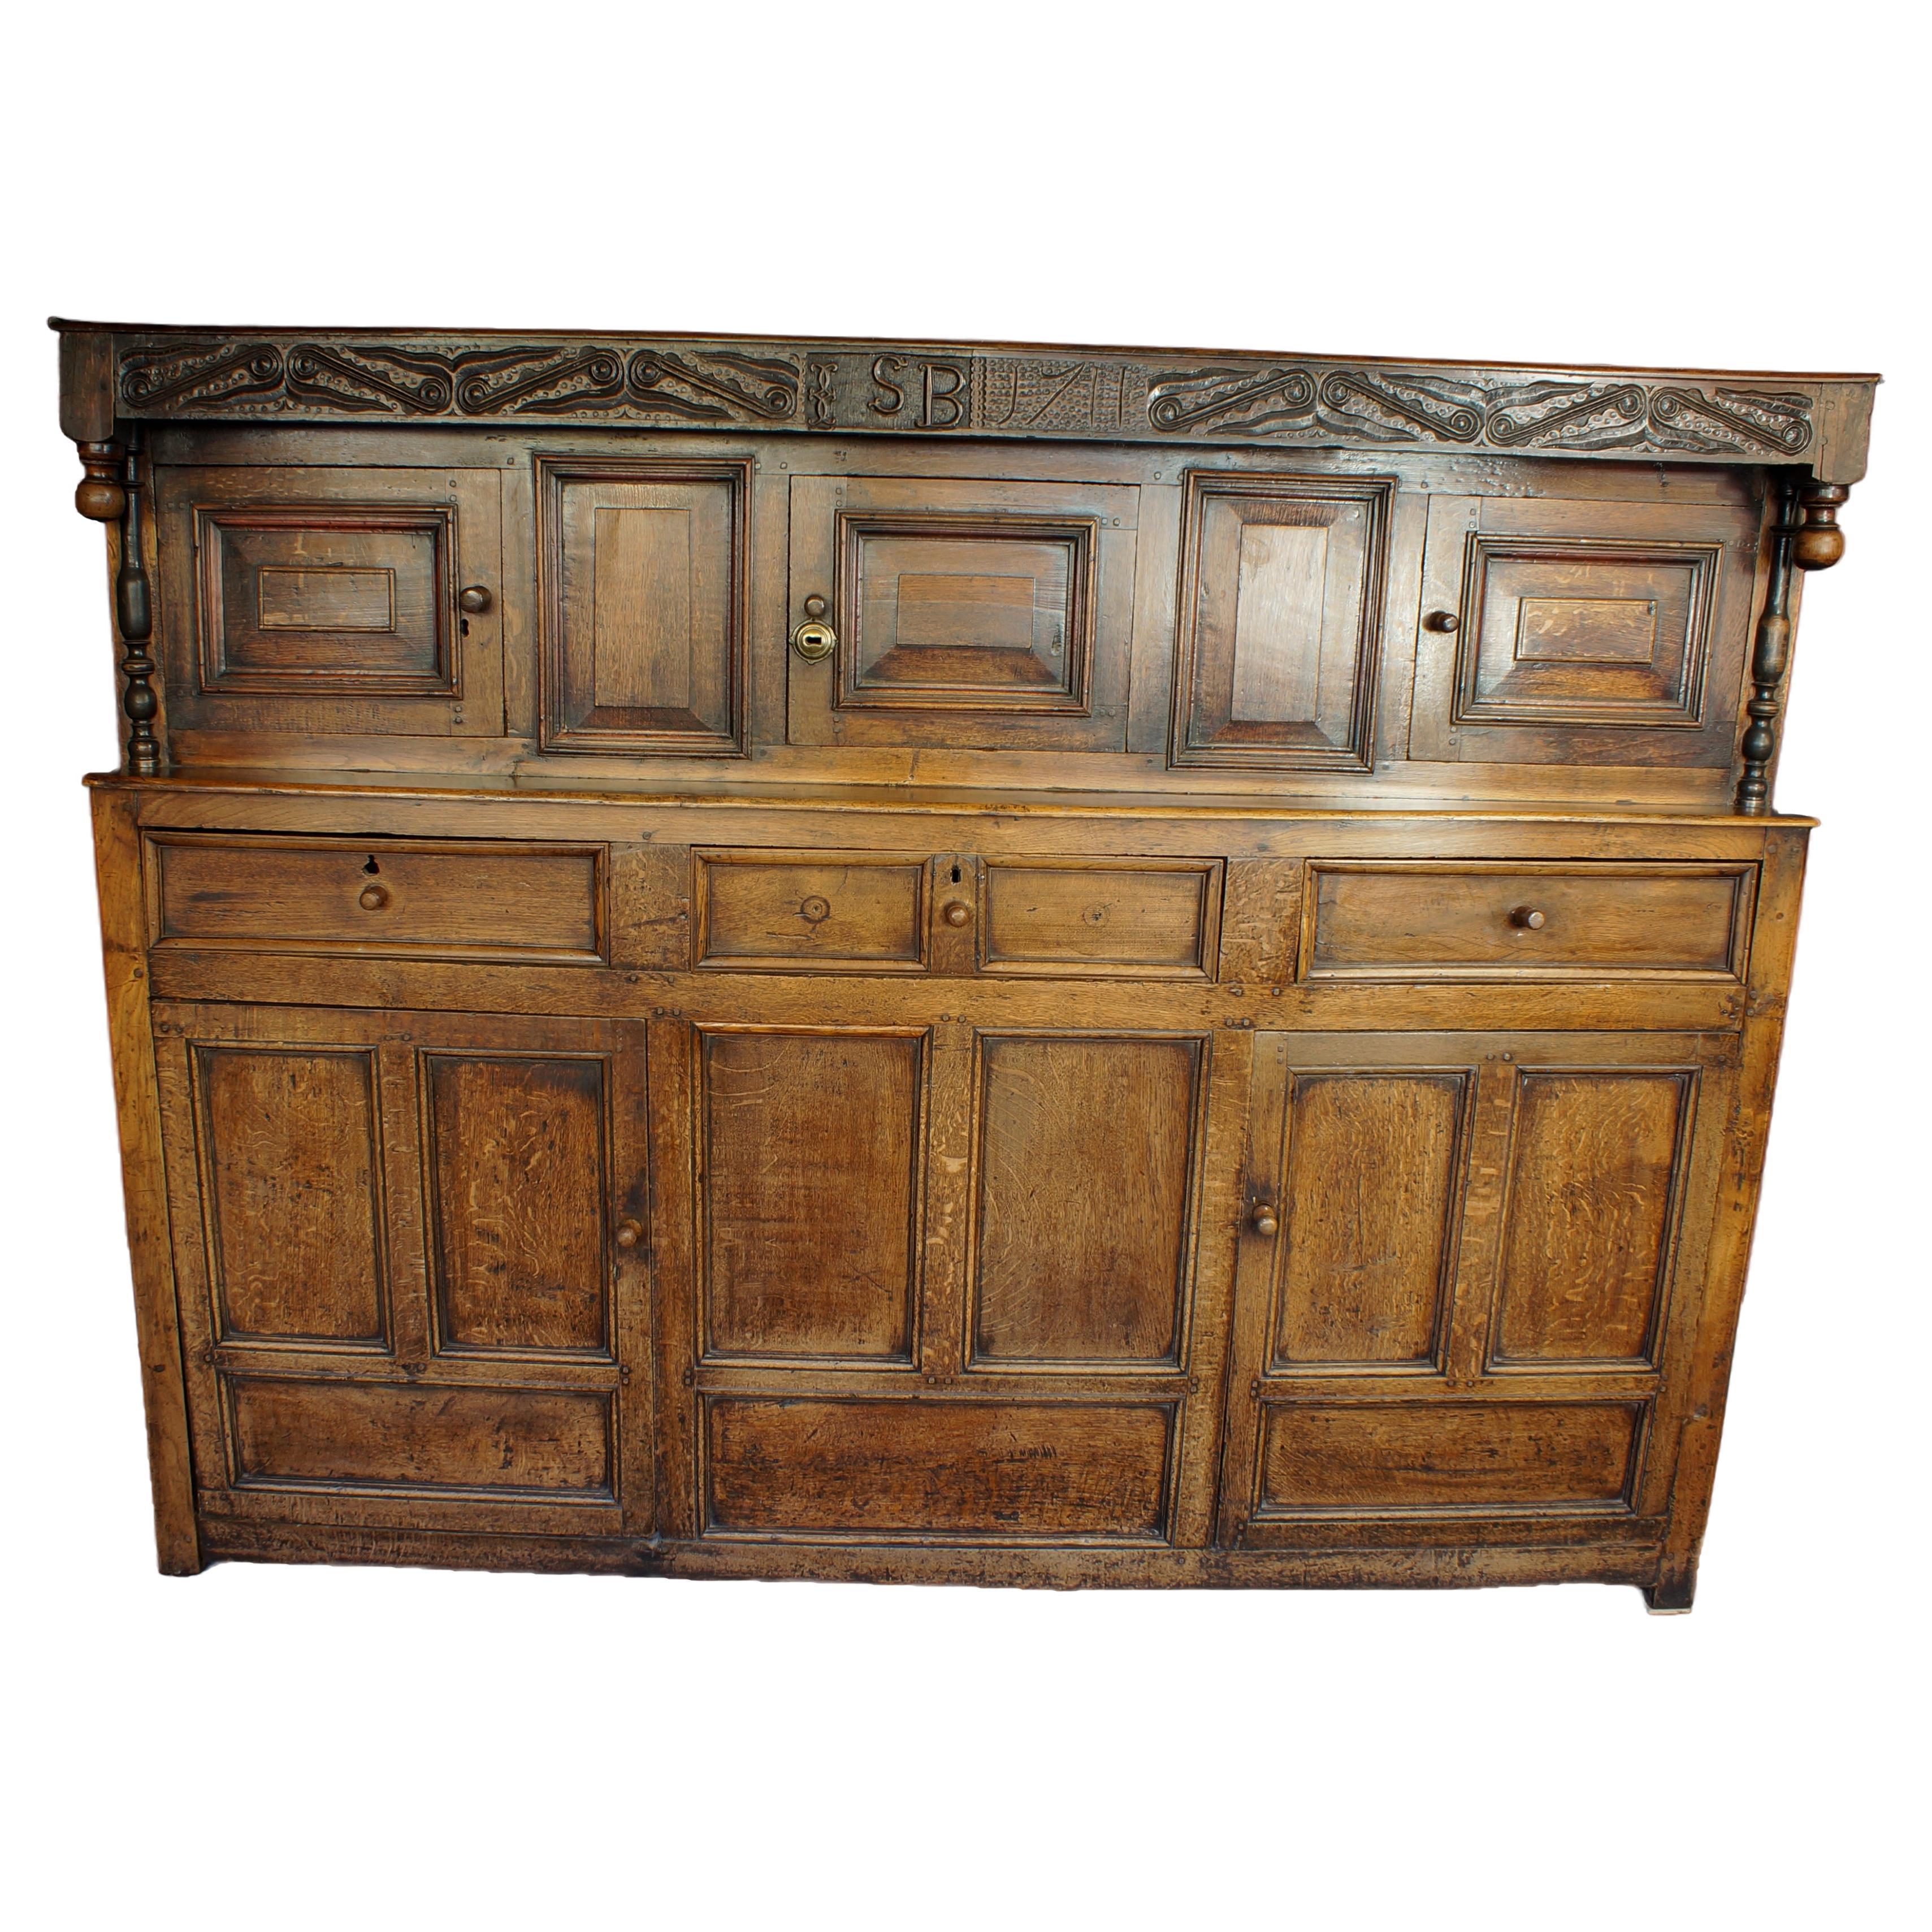 A Superb early 18th Century  Westmorland Oak Court Cupboard.
Having a carved top rail carved with the initials  I/J S B and dated 1711.
The upper section has three doors with raised fielded panels and two blind panels, above three moulded drawers